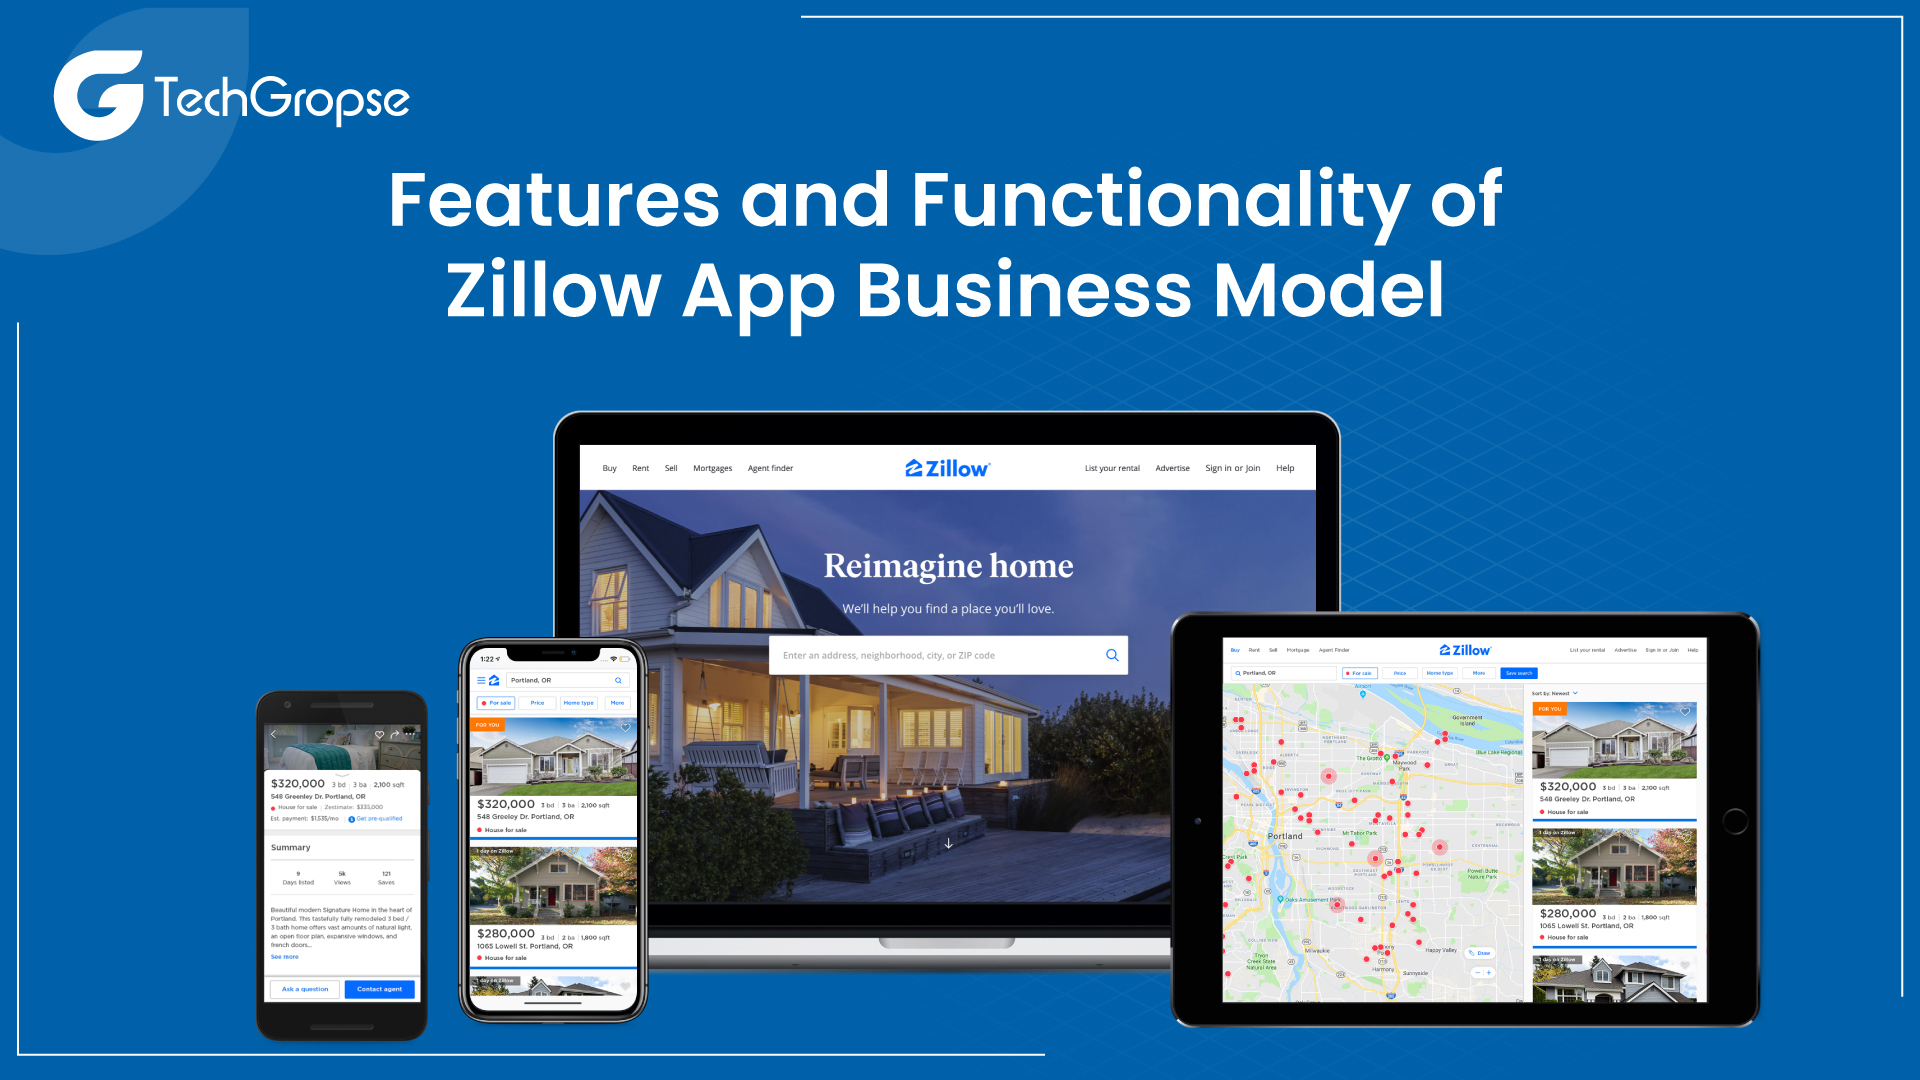 Features and Functionality of Zillow App Business Model